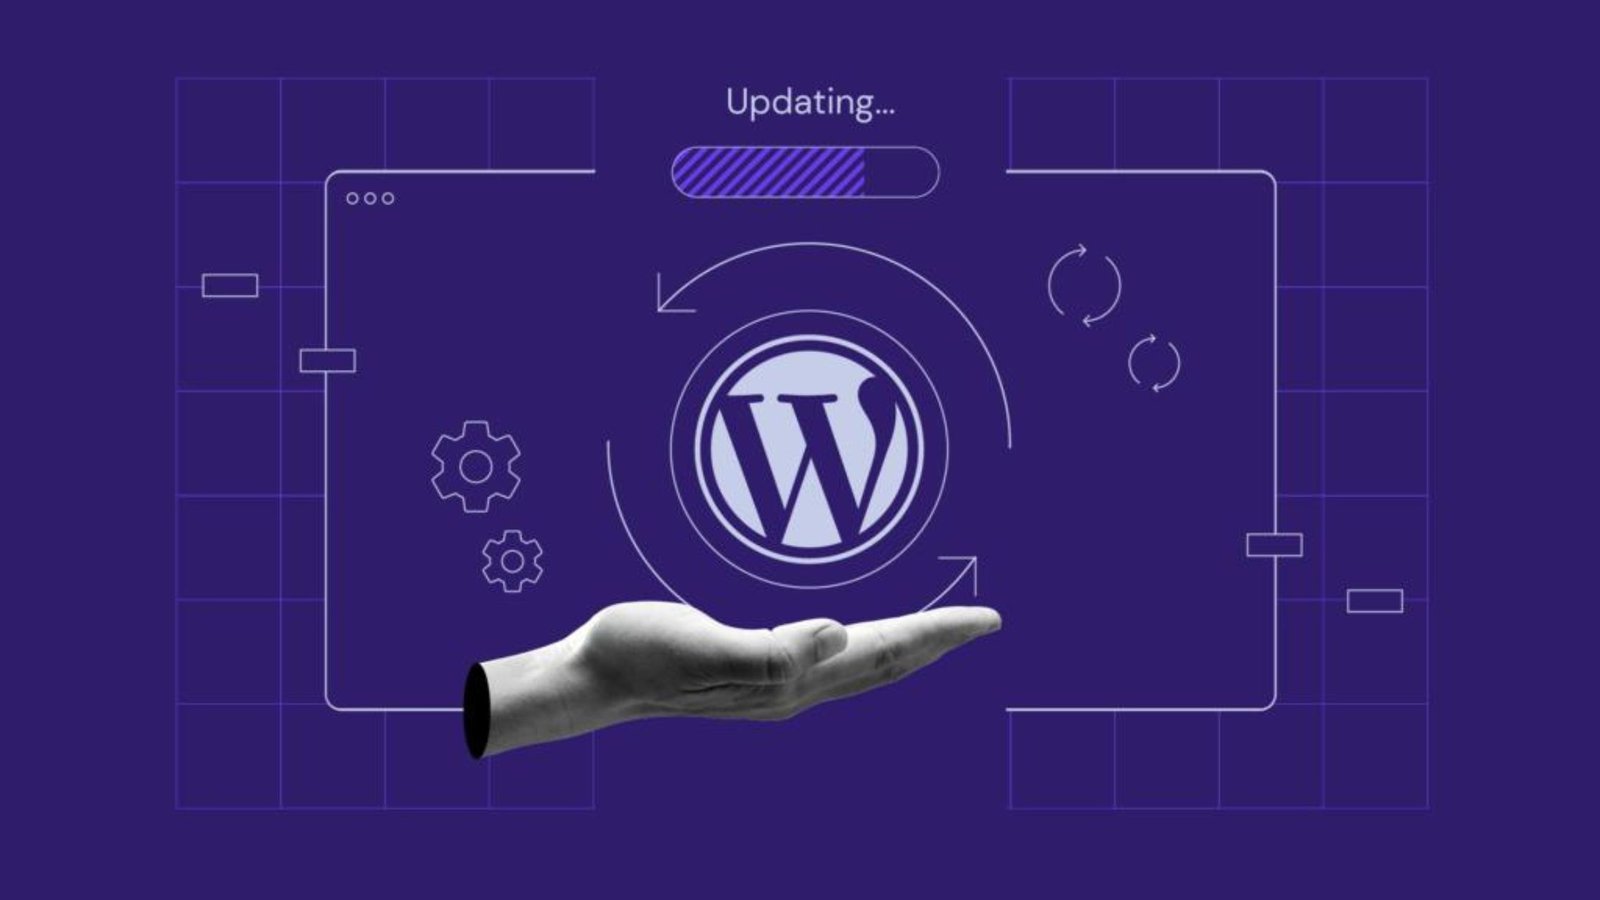 a picture of a hand with WordPress logo and purple background